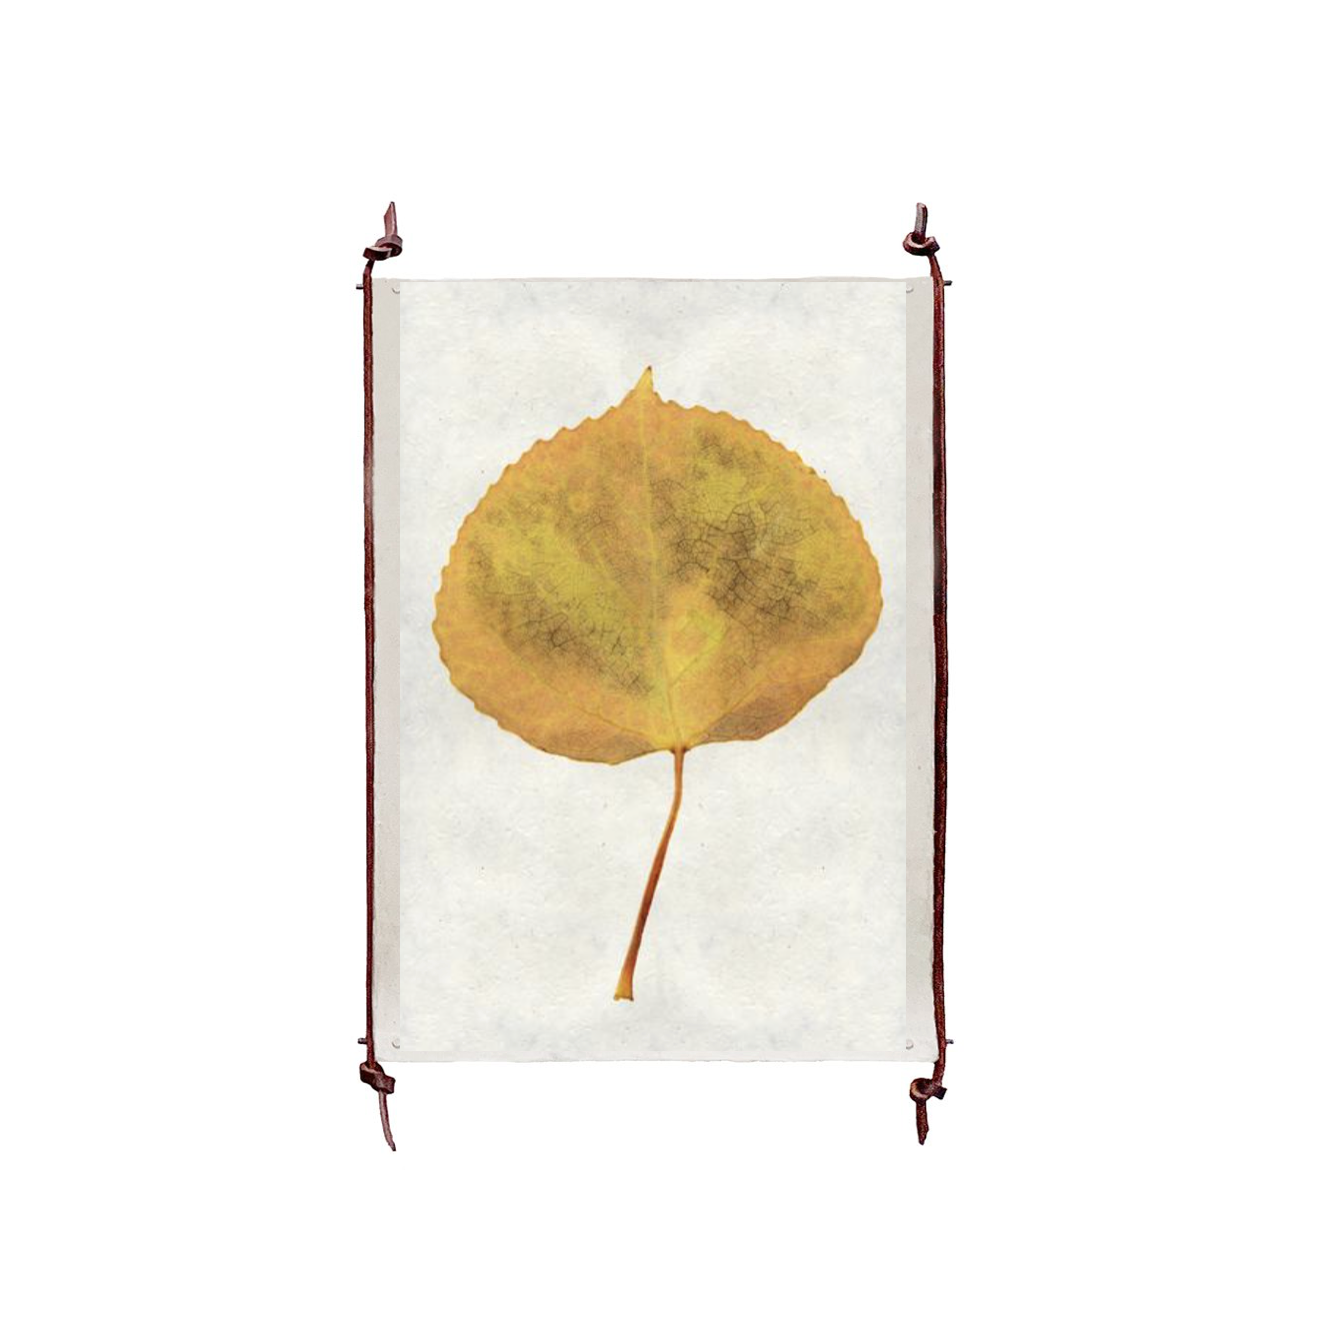 This Aspen is made from raw edge handmade paper from Nepal. Hang in your kitchen, living room, or bedroom to bring the space some organic, raw character!  Fine art prints  Pencil signatureThis Aspen is made from raw edge handmade paper from Nepal. Hang in your kitchen, living room, or bedroom to bring the space some organic, raw character!  Fine art prints  Pencil signature